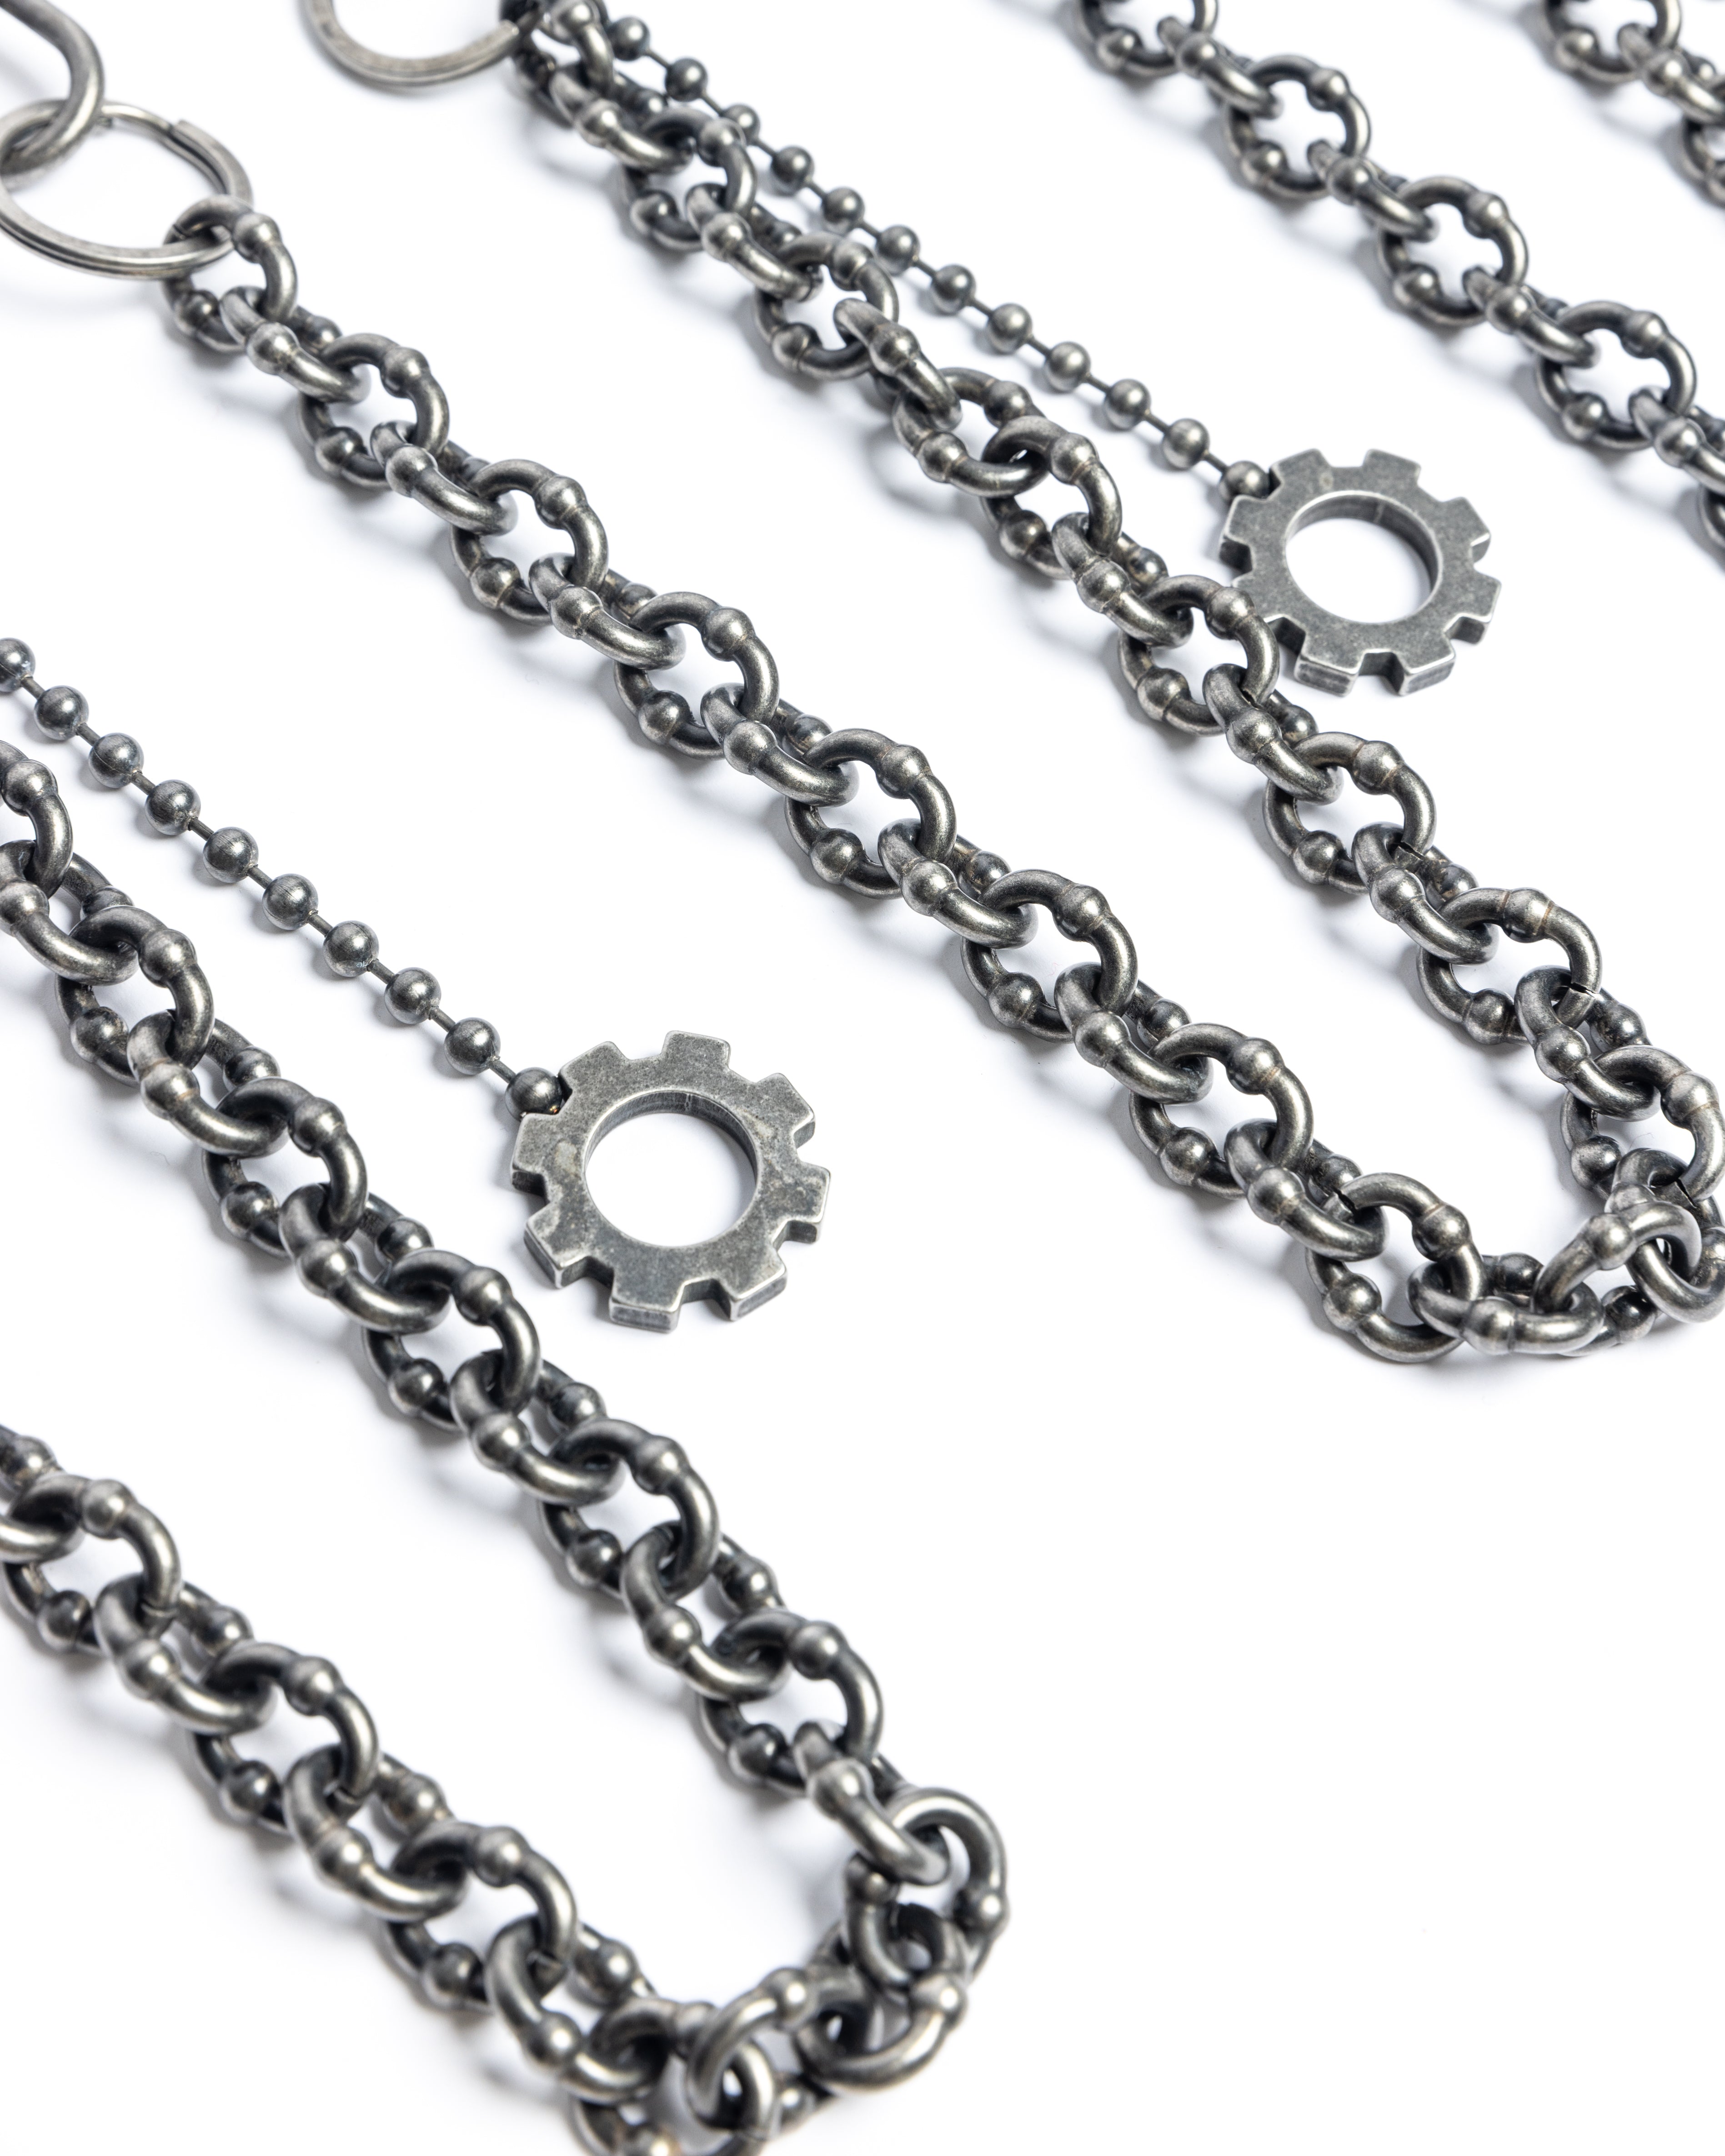 CUSTOM COIL SHAPED WALLET CHAIN